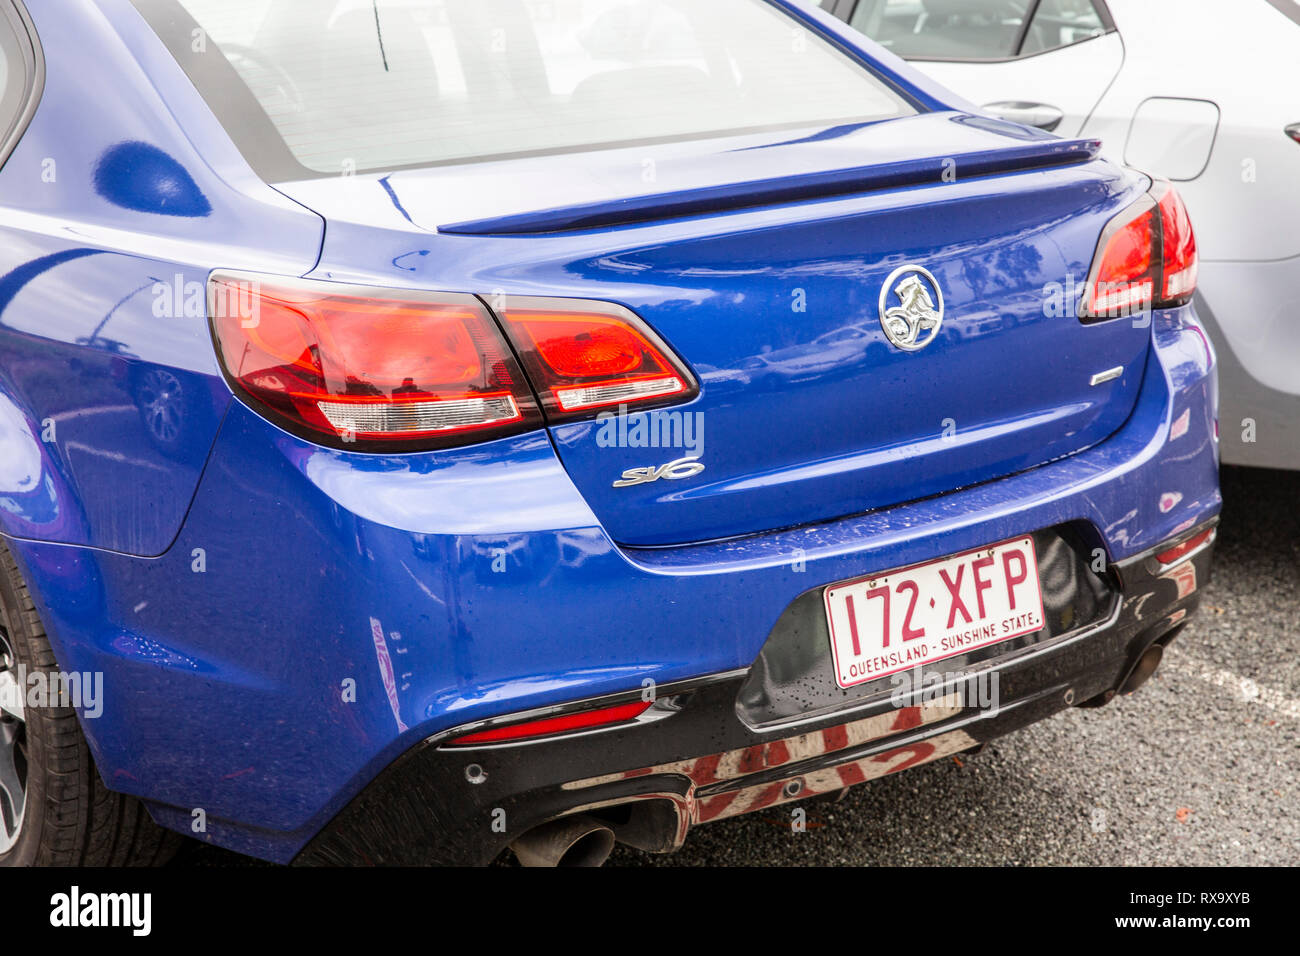 Rear of Holden commodore model SV6 with a Queensland state number plate,Australia Stock Photo